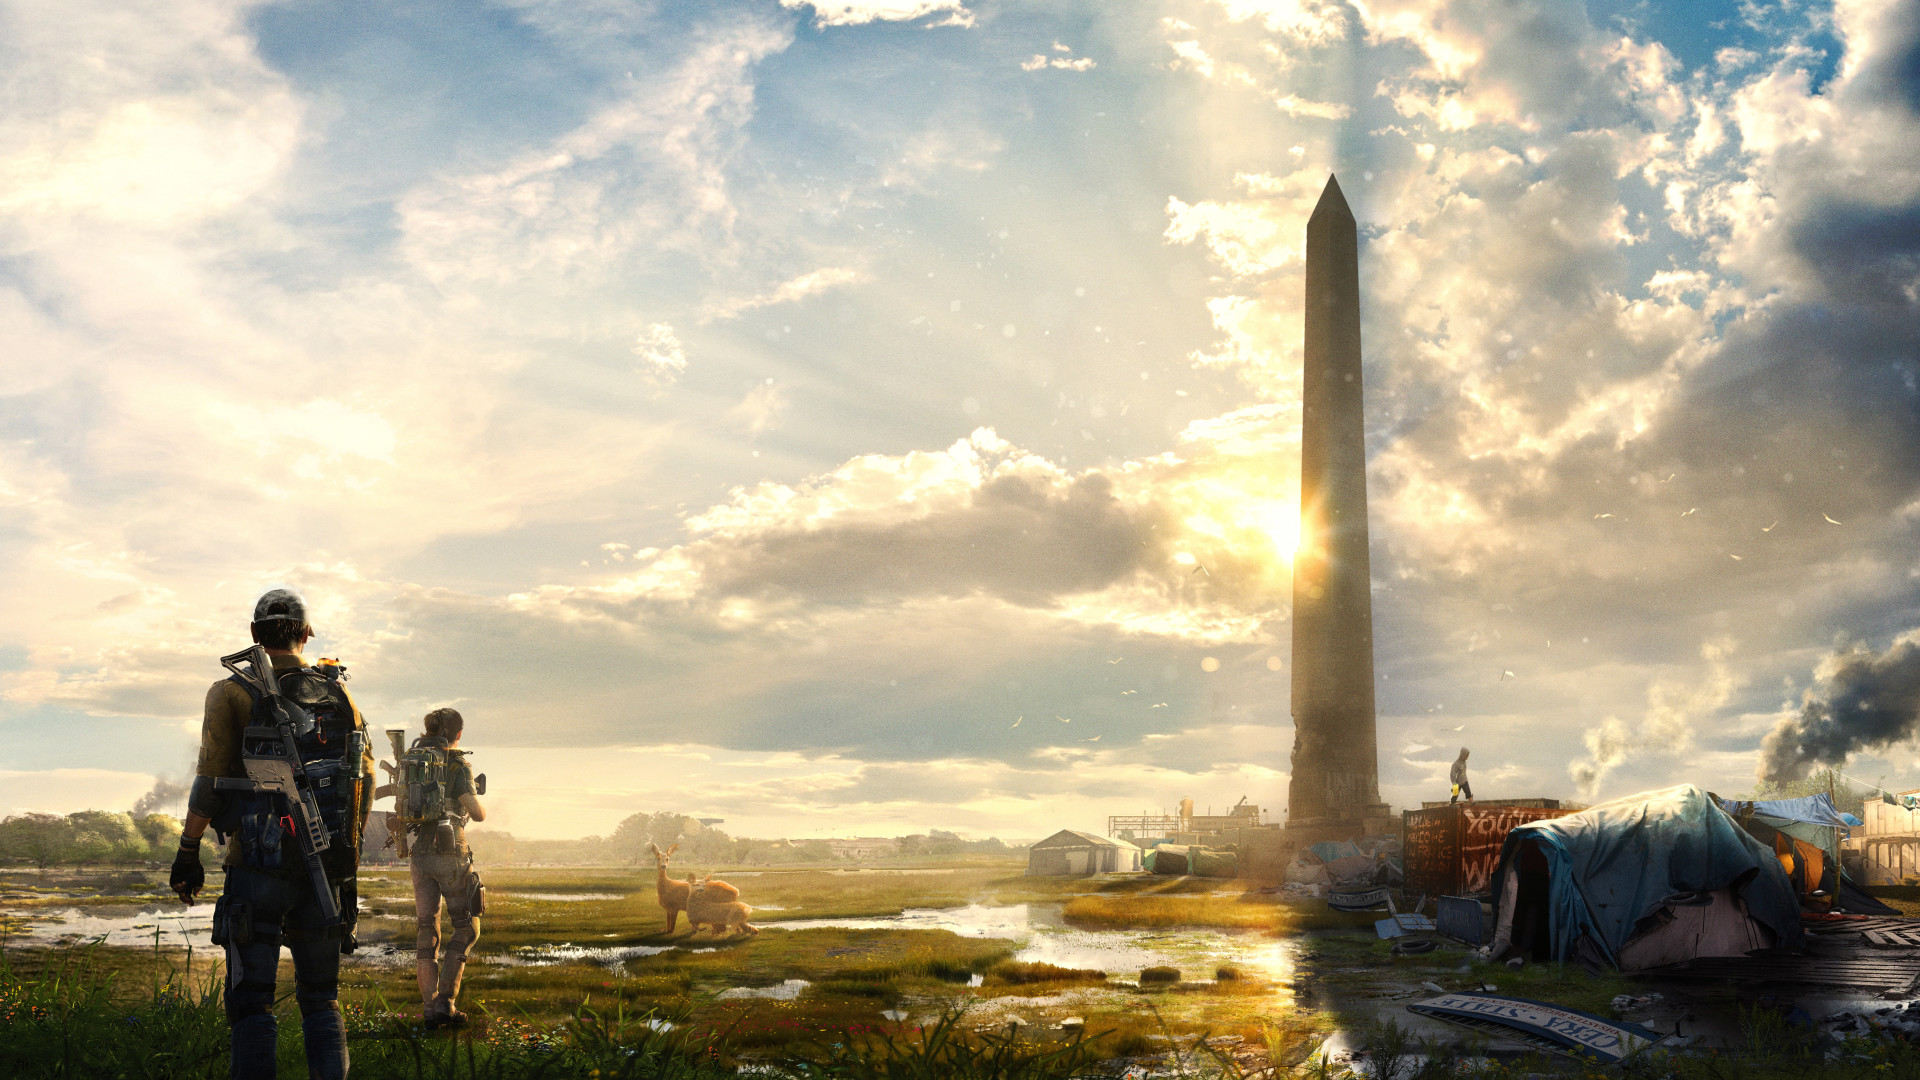 1920x1080 Tom Clancy's The Division 2 Desktop Wallpapers 2